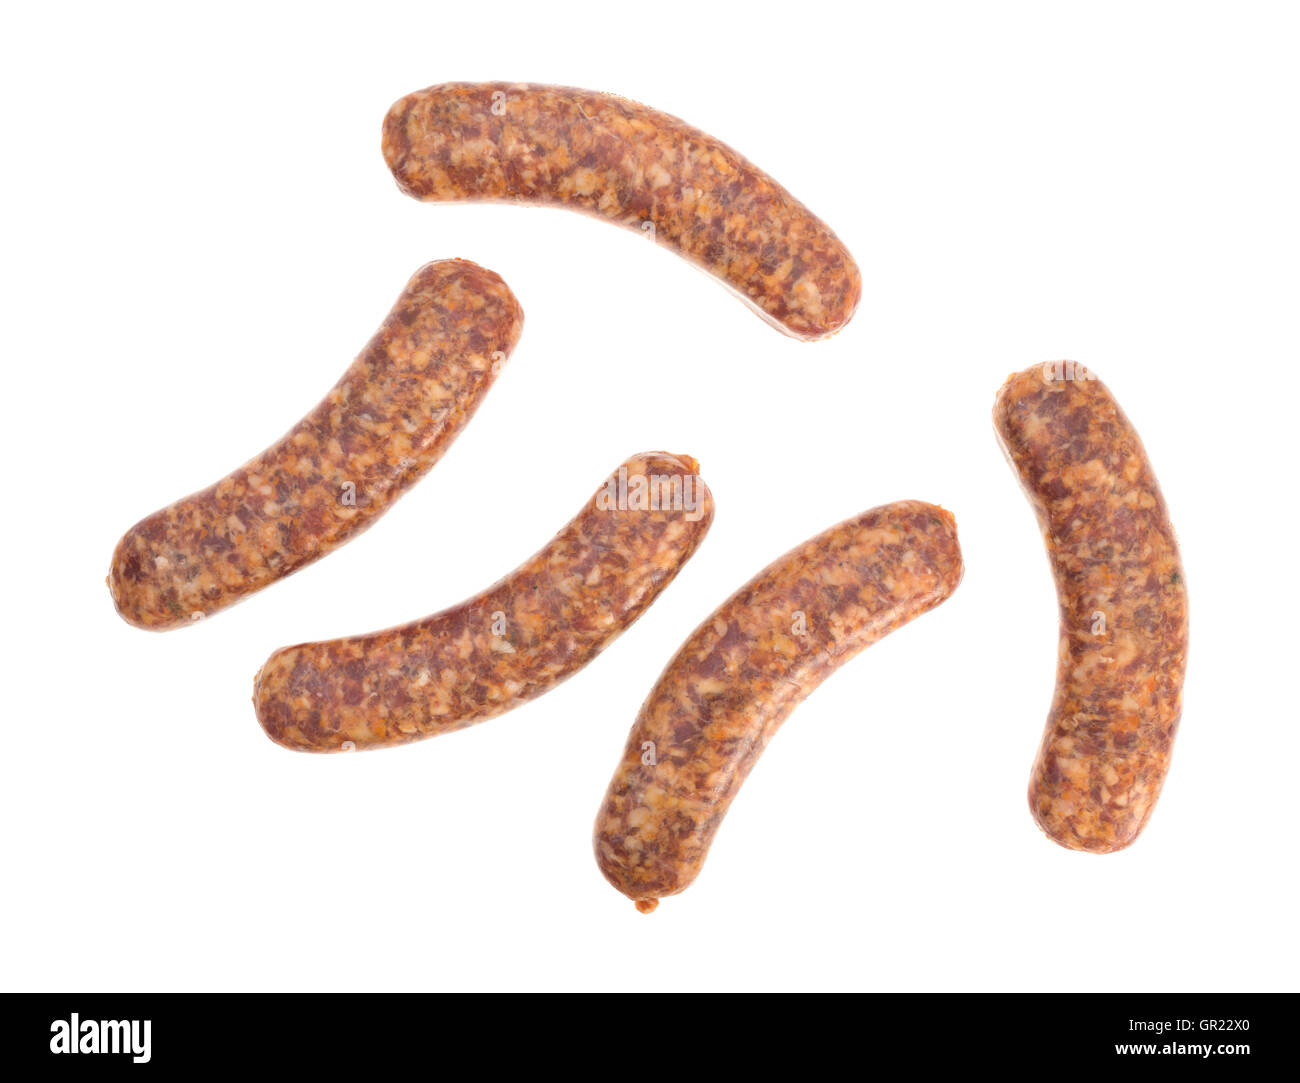 Top view of several spicy bratwurst links on a white background. Stock Photo